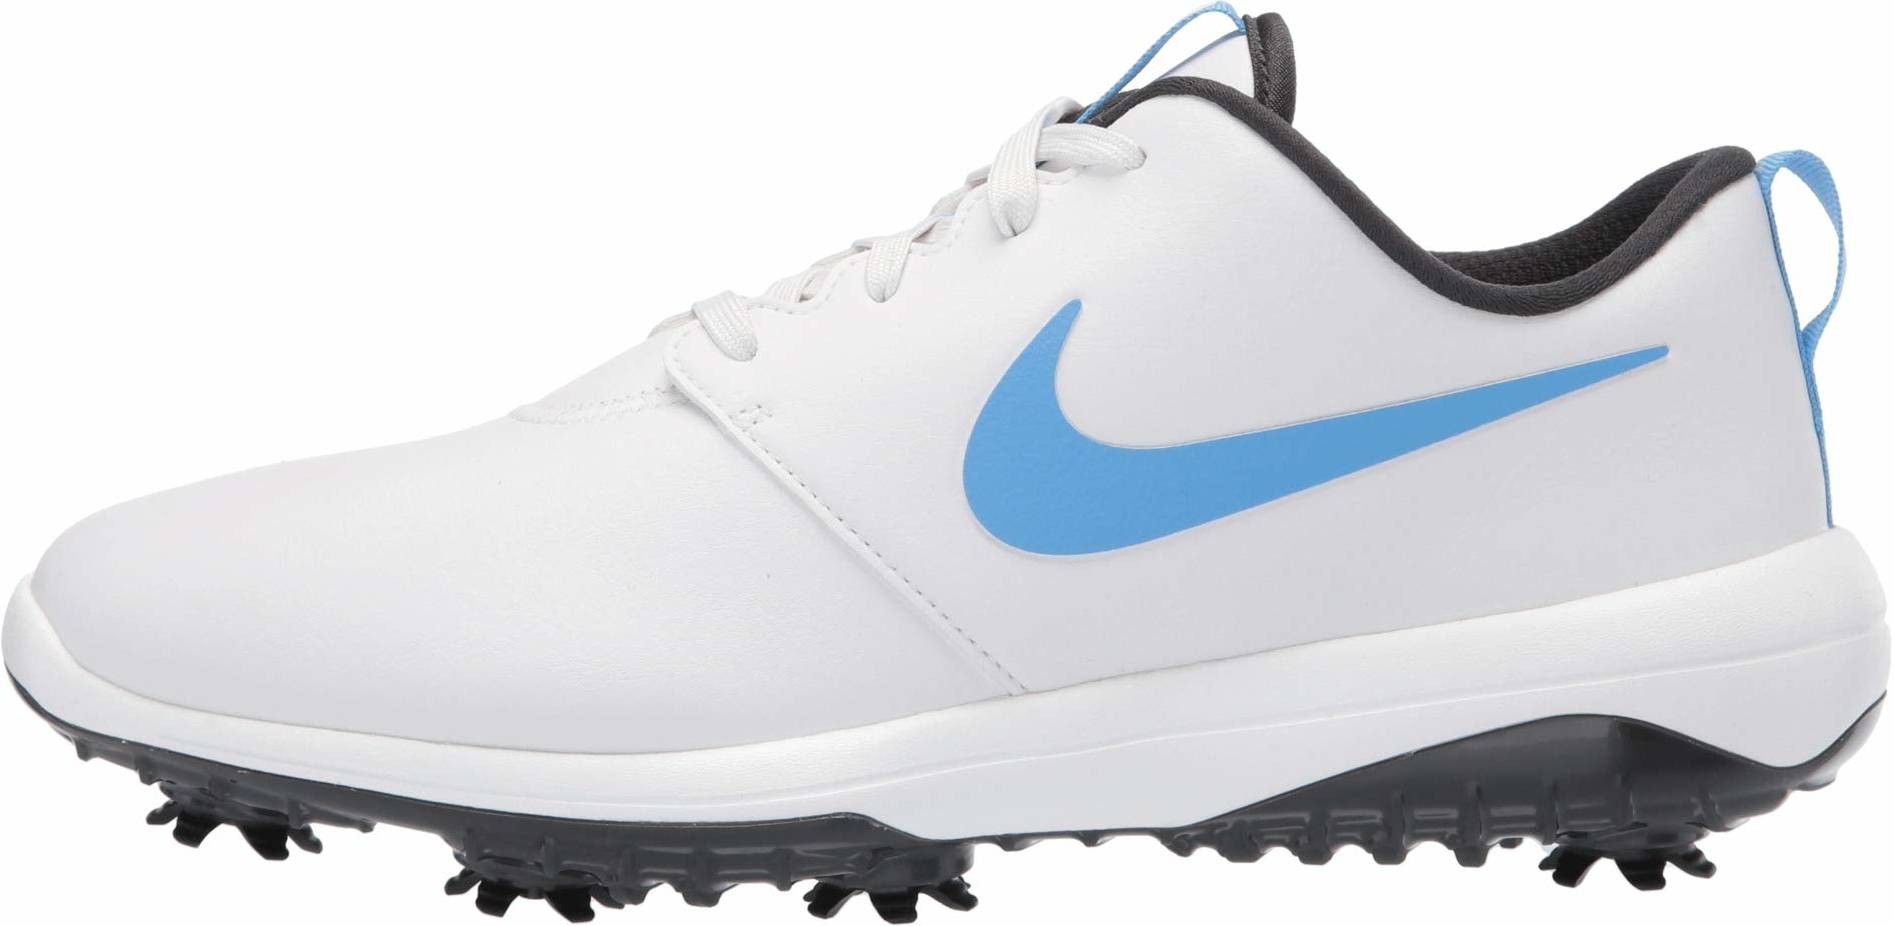 nike golf shoes price